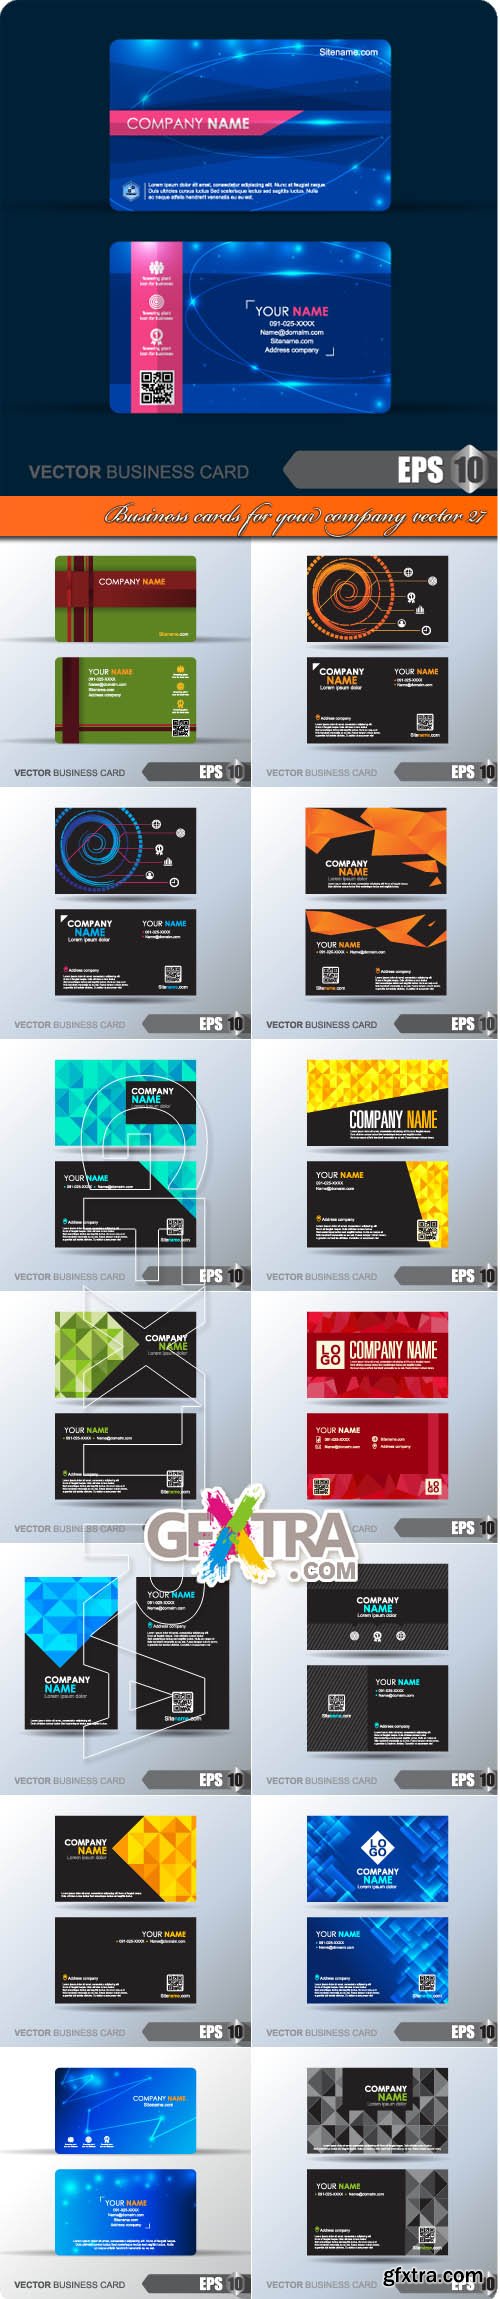 Business cards for your company vector 27